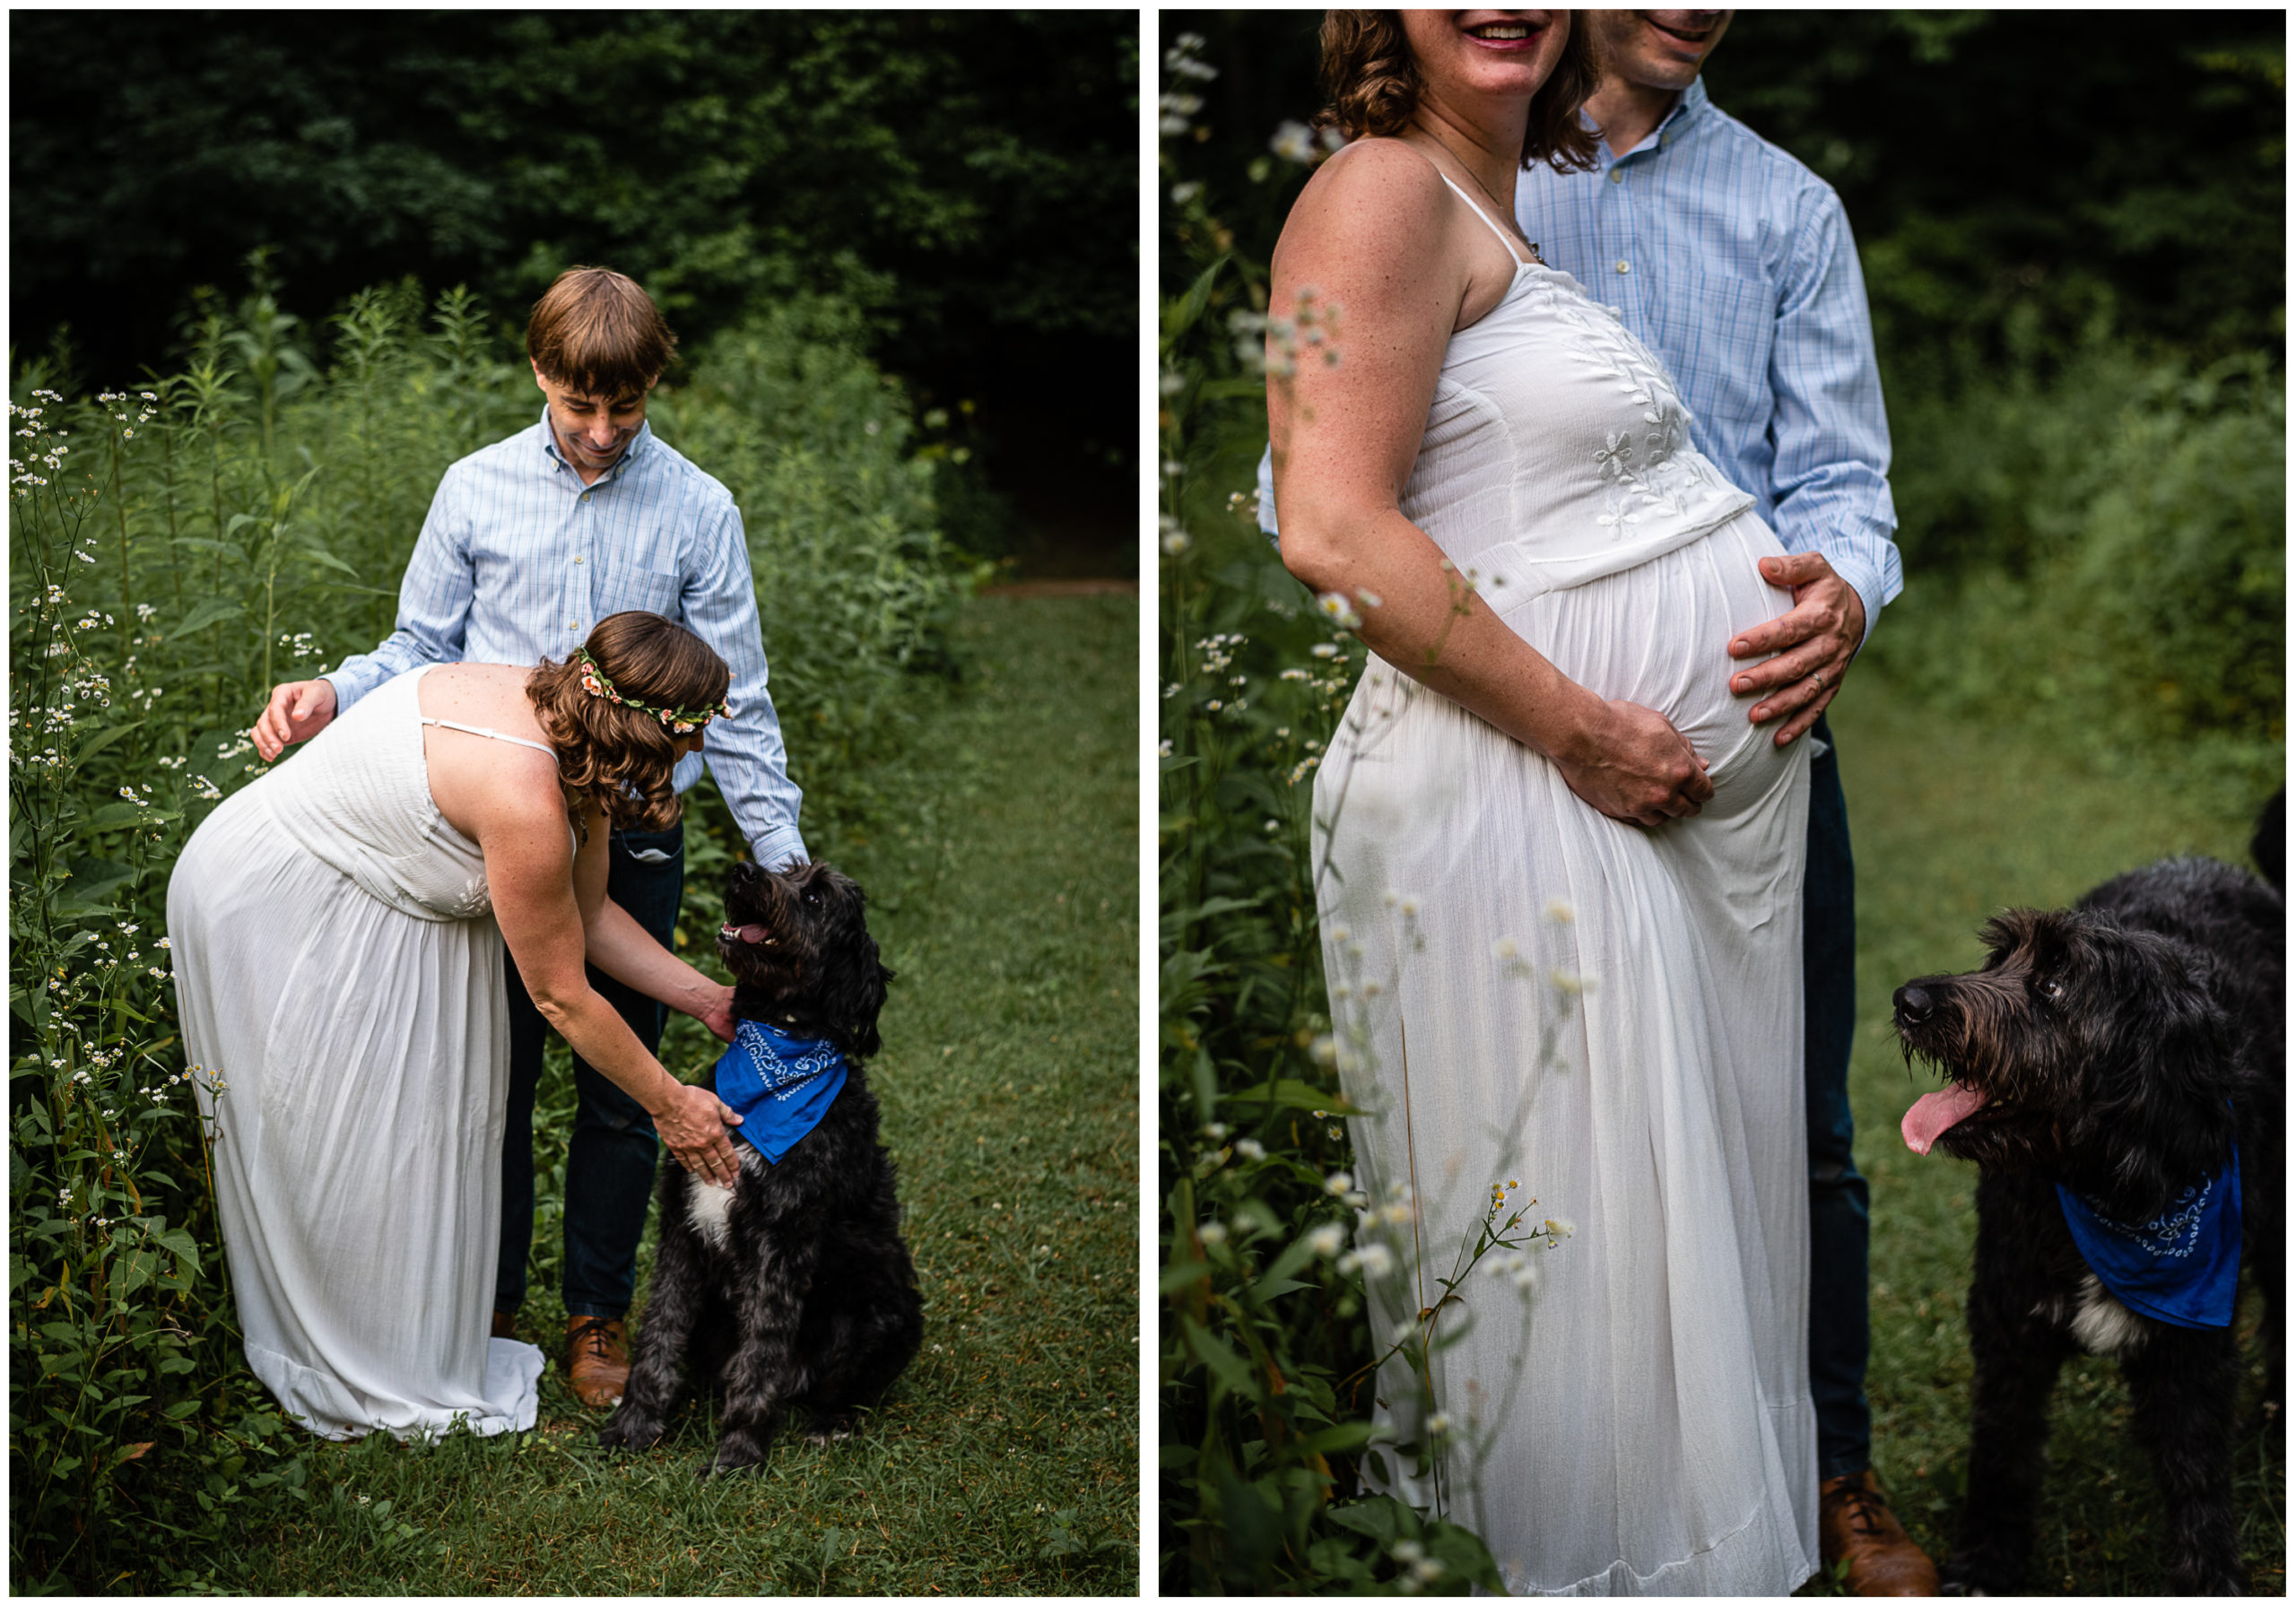 Collage of a couple and their large black dog posing for maternity photos in a lush green field.